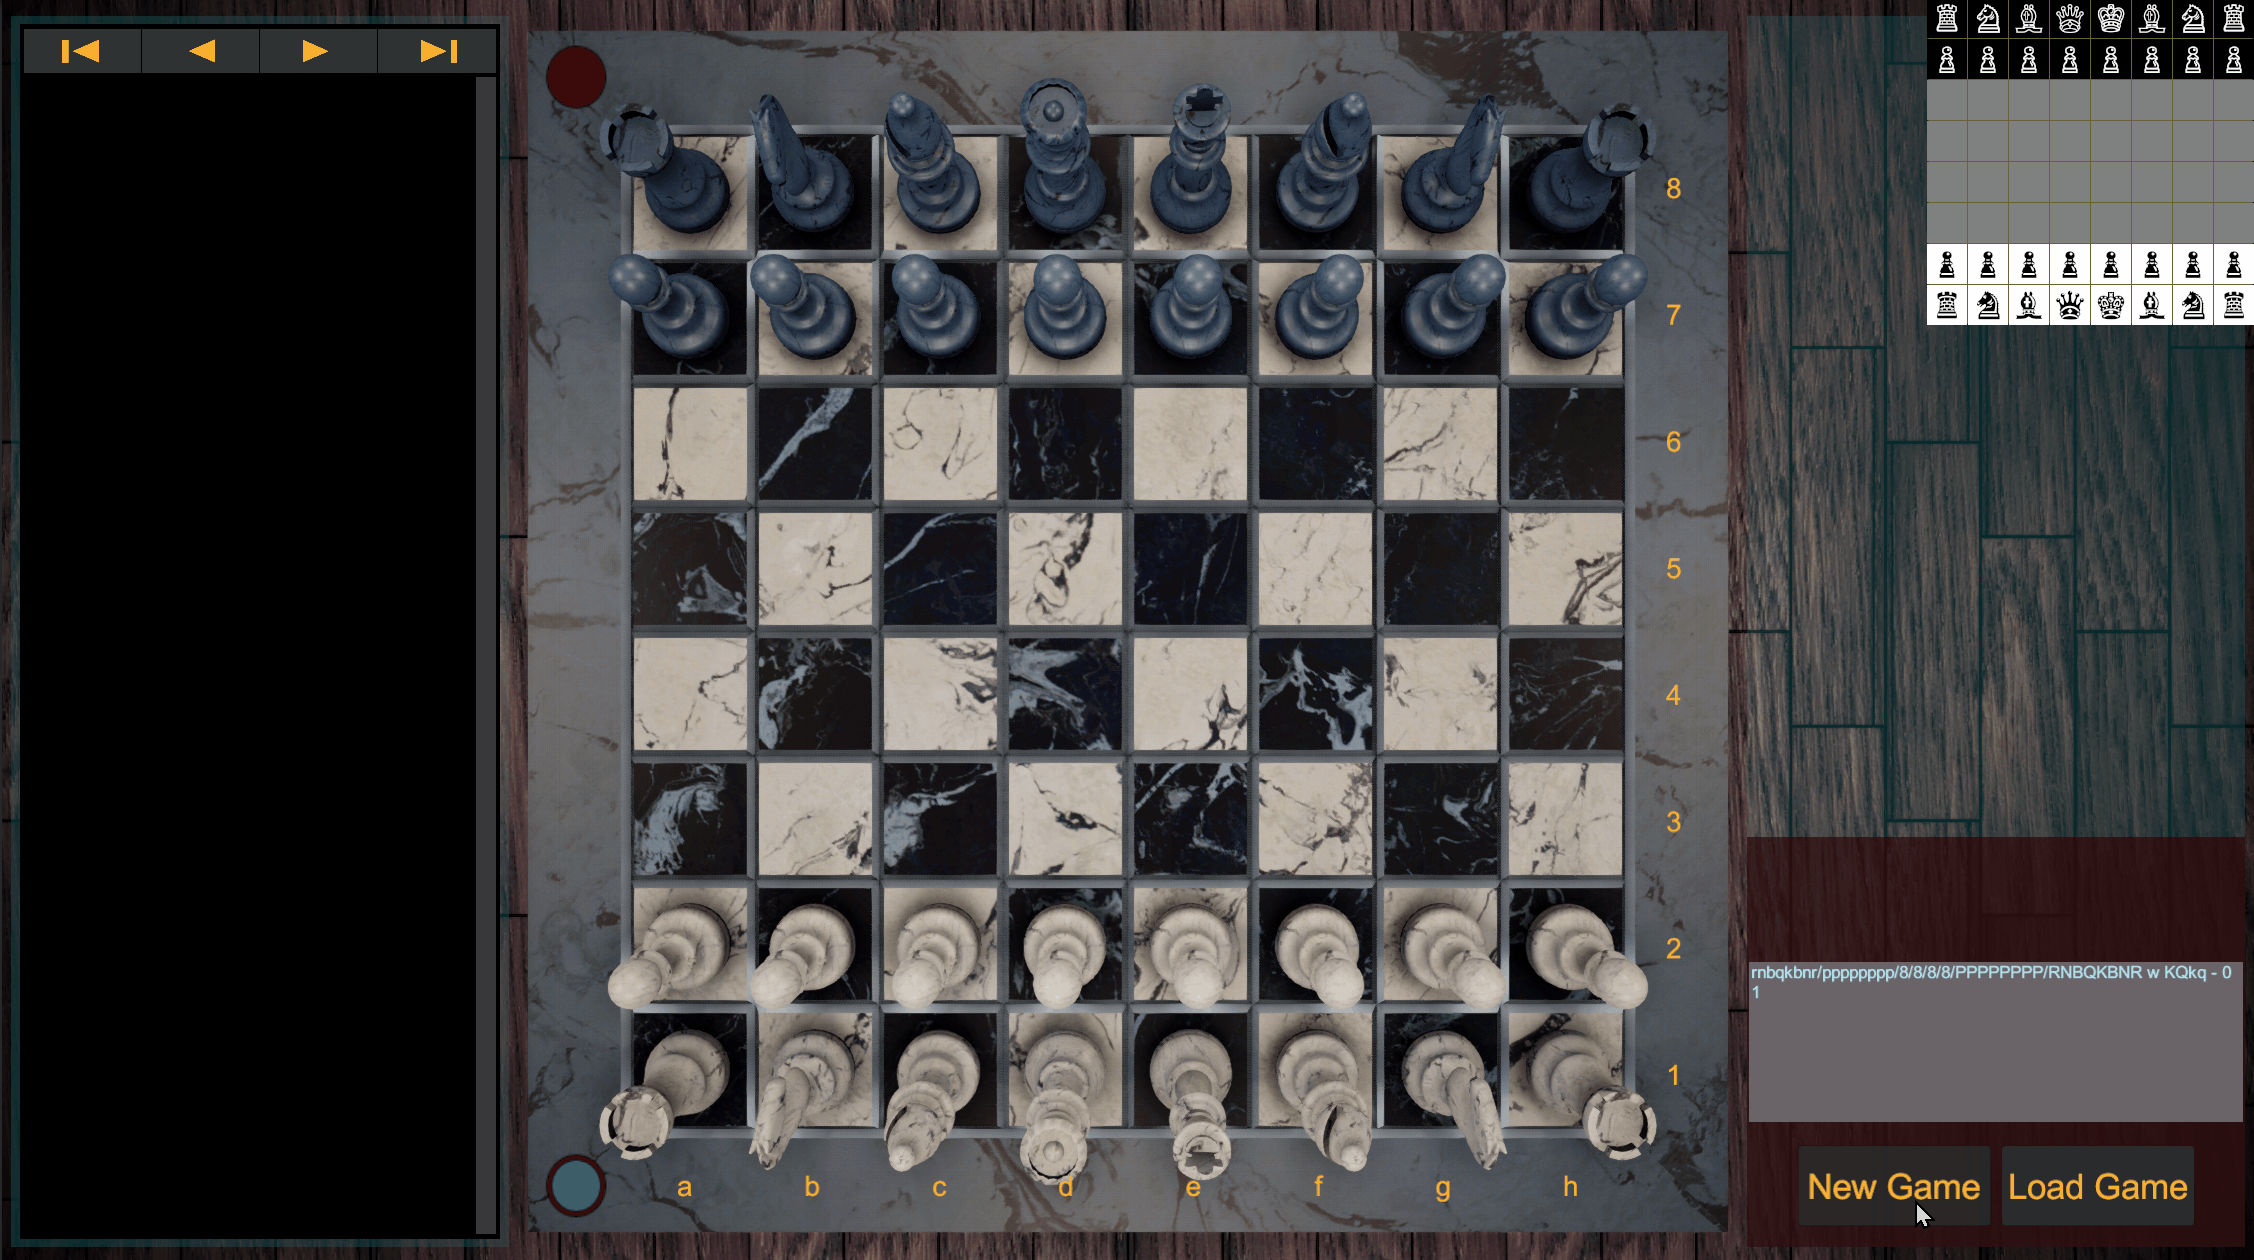 Construction of a 3D chess board 